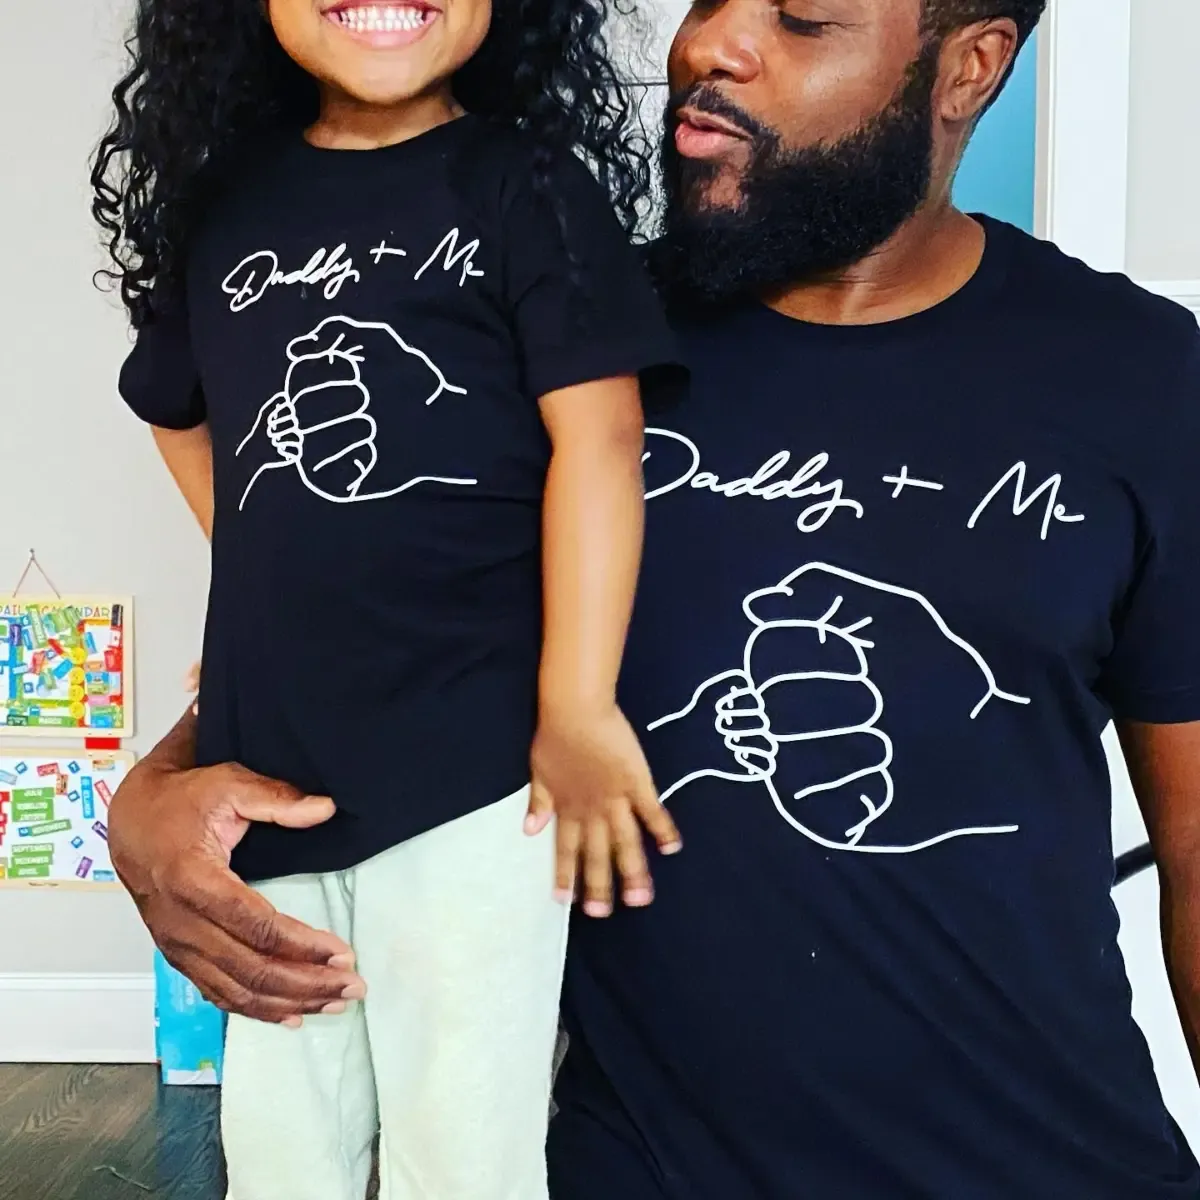 Malcolm-Jamal Warner and his wife have a beautiful five-year-old daughter